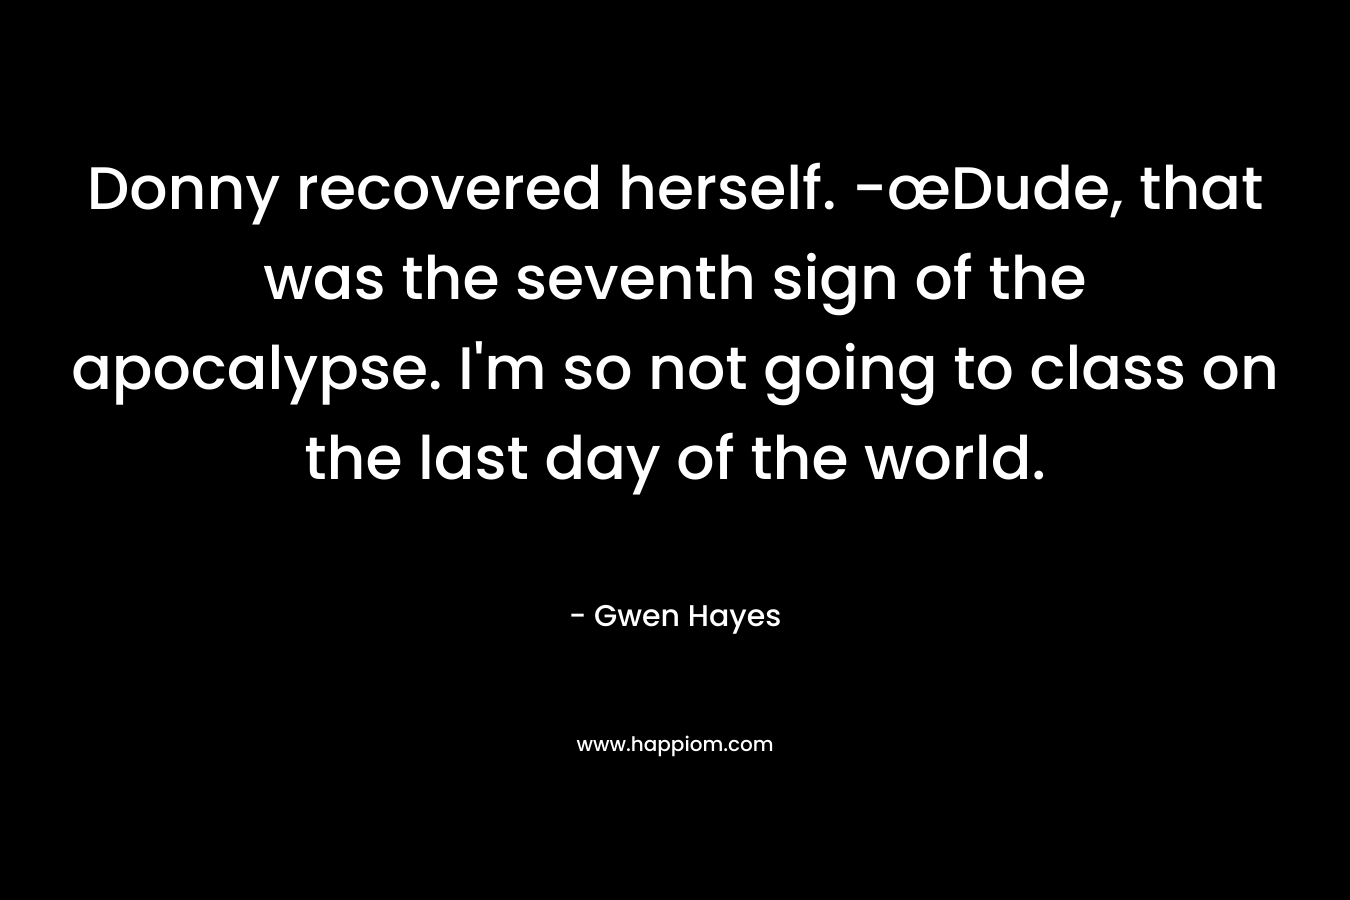 Donny recovered herself. -œDude, that was the seventh sign of the apocalypse. I’m so not going to class on the last day of the world. – Gwen Hayes